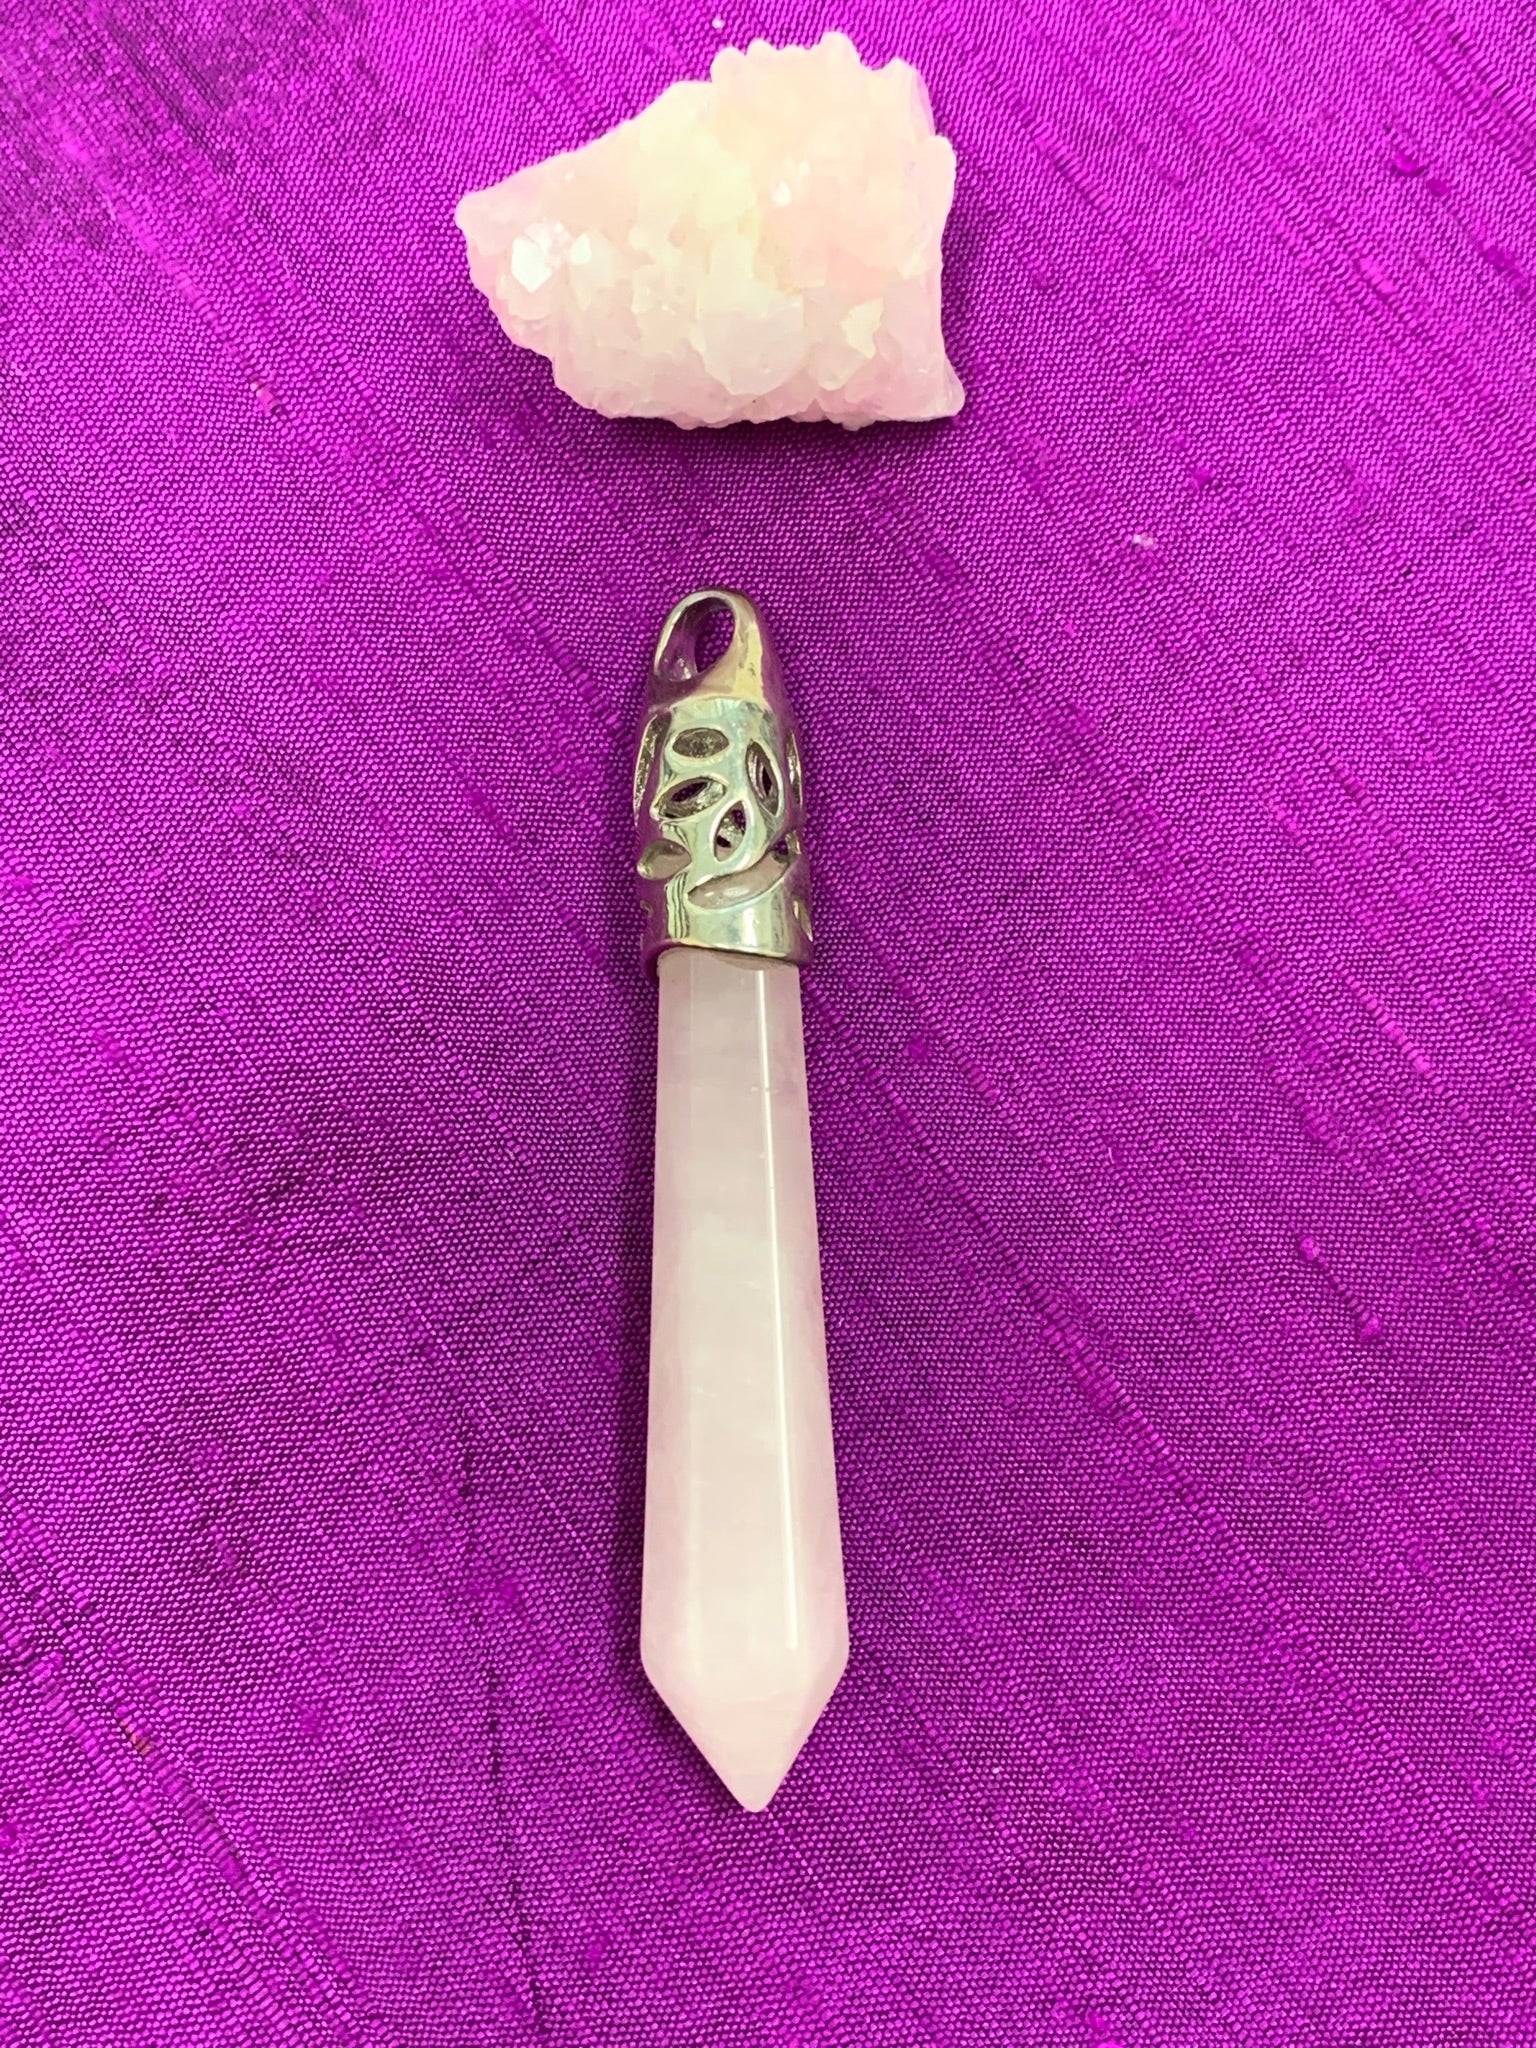 A Second view of the long rose quartz crystal point set in a fancy silver-plated bail (not sterling silver) for this powerful pendant. Rose quartz is the "stone of unconditional love & infinite peace." It opens the heart and soothes emotional distress. Perfect for wearing over your heart to take advantage of its benefits all day long. Approximately 2½-2¾".